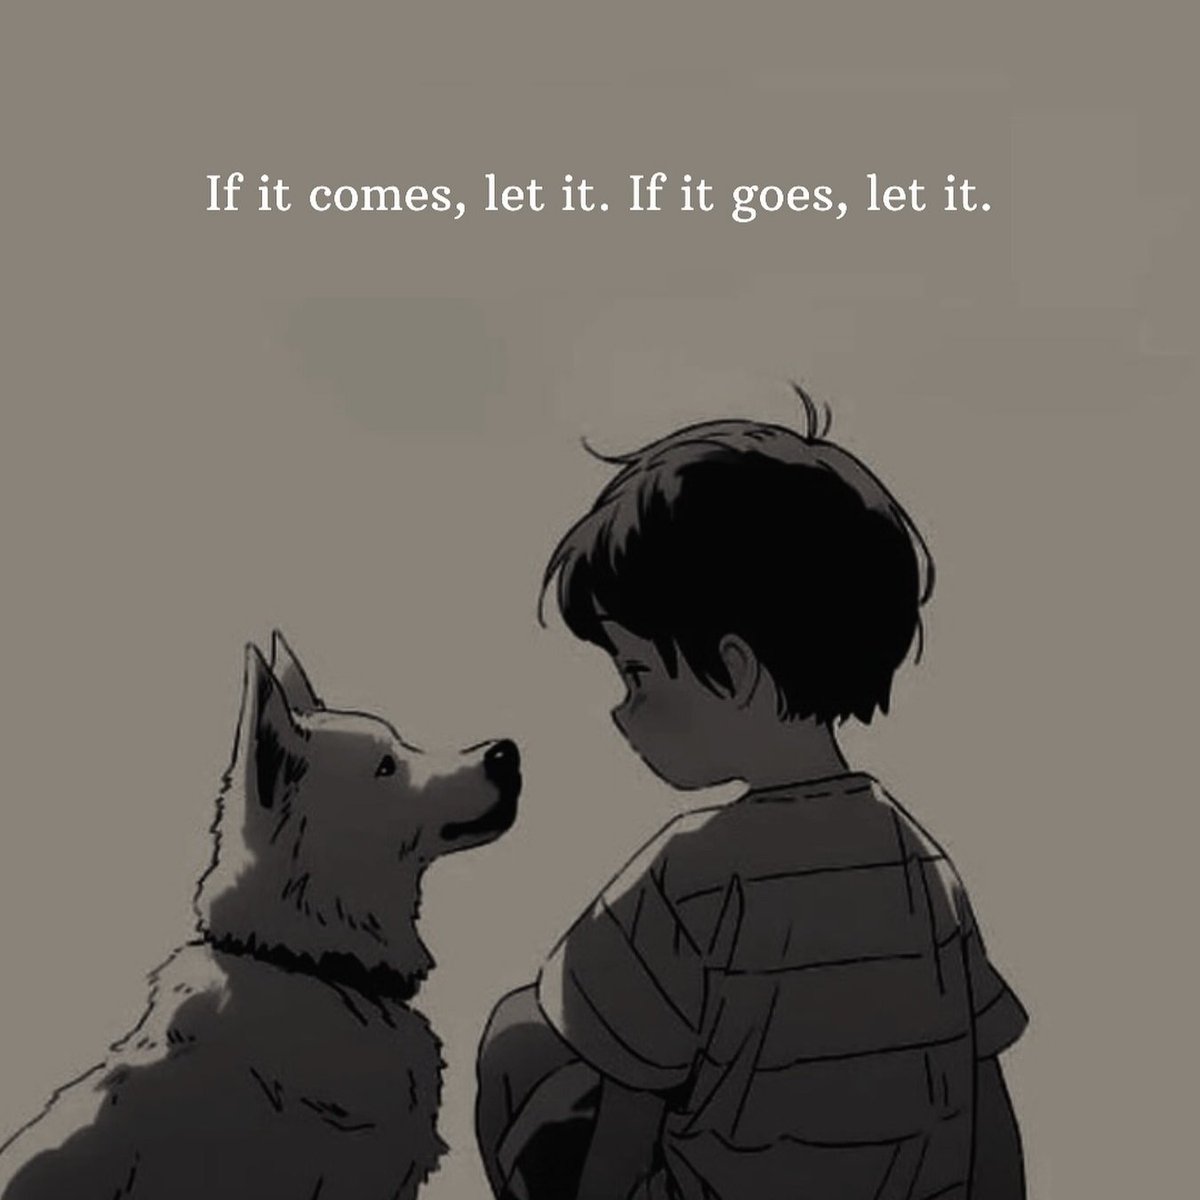 Embrace the flow of life: if it comes, let it. If it goes, let it.